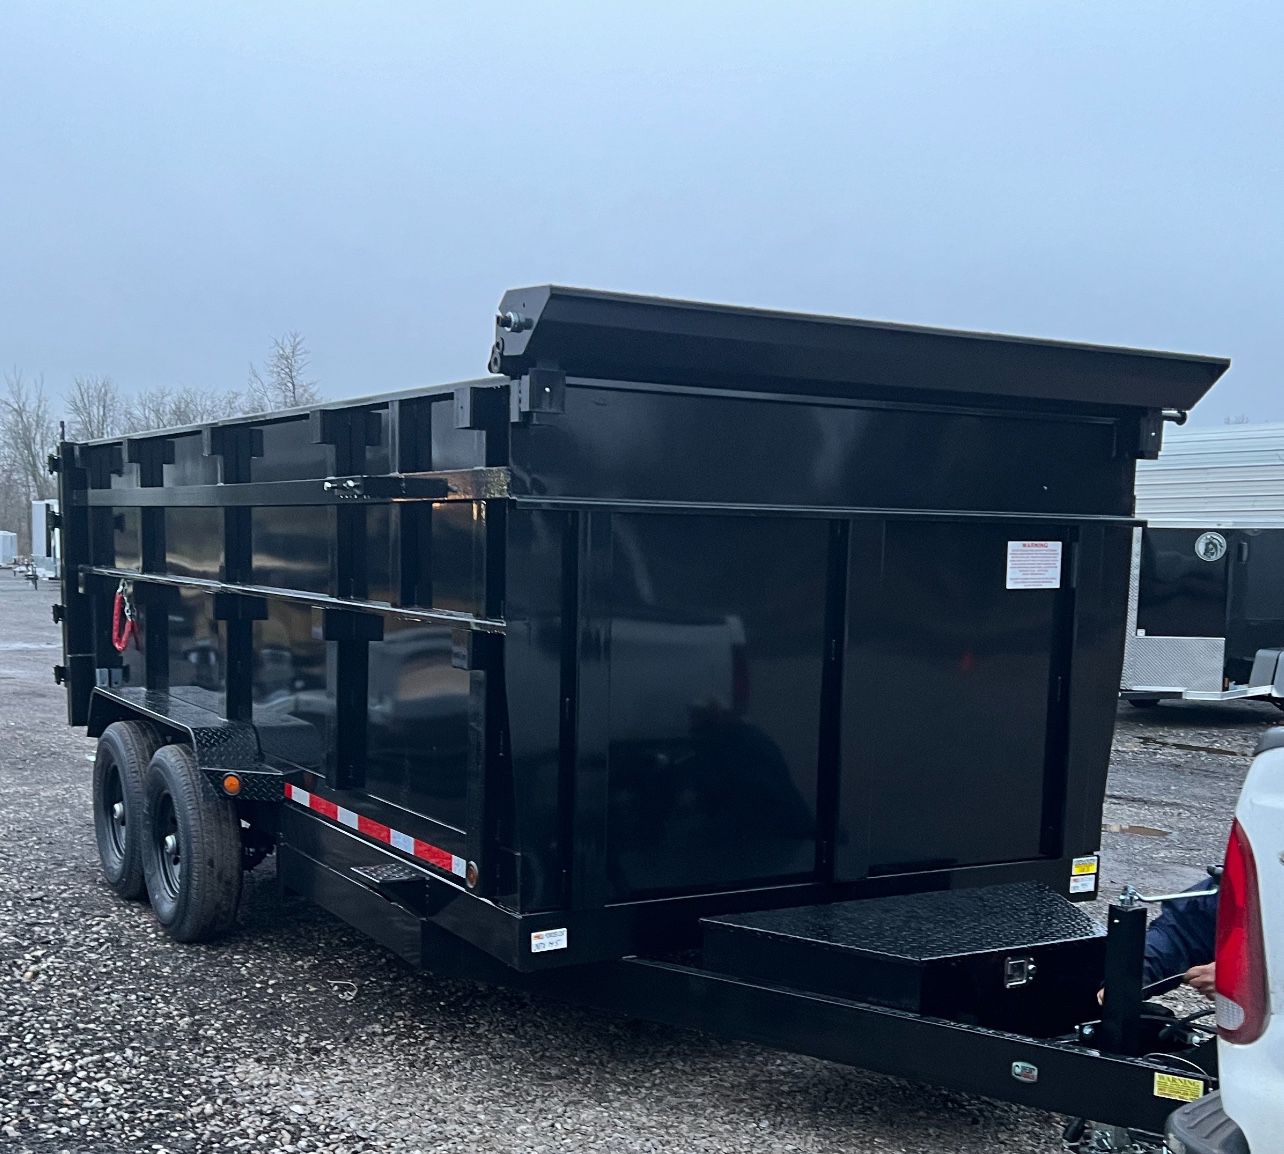 2024 16’ CJ Heavy Hauler Highside Remote Hydraulic Dump Trailer with Ramps Used Once $17,500